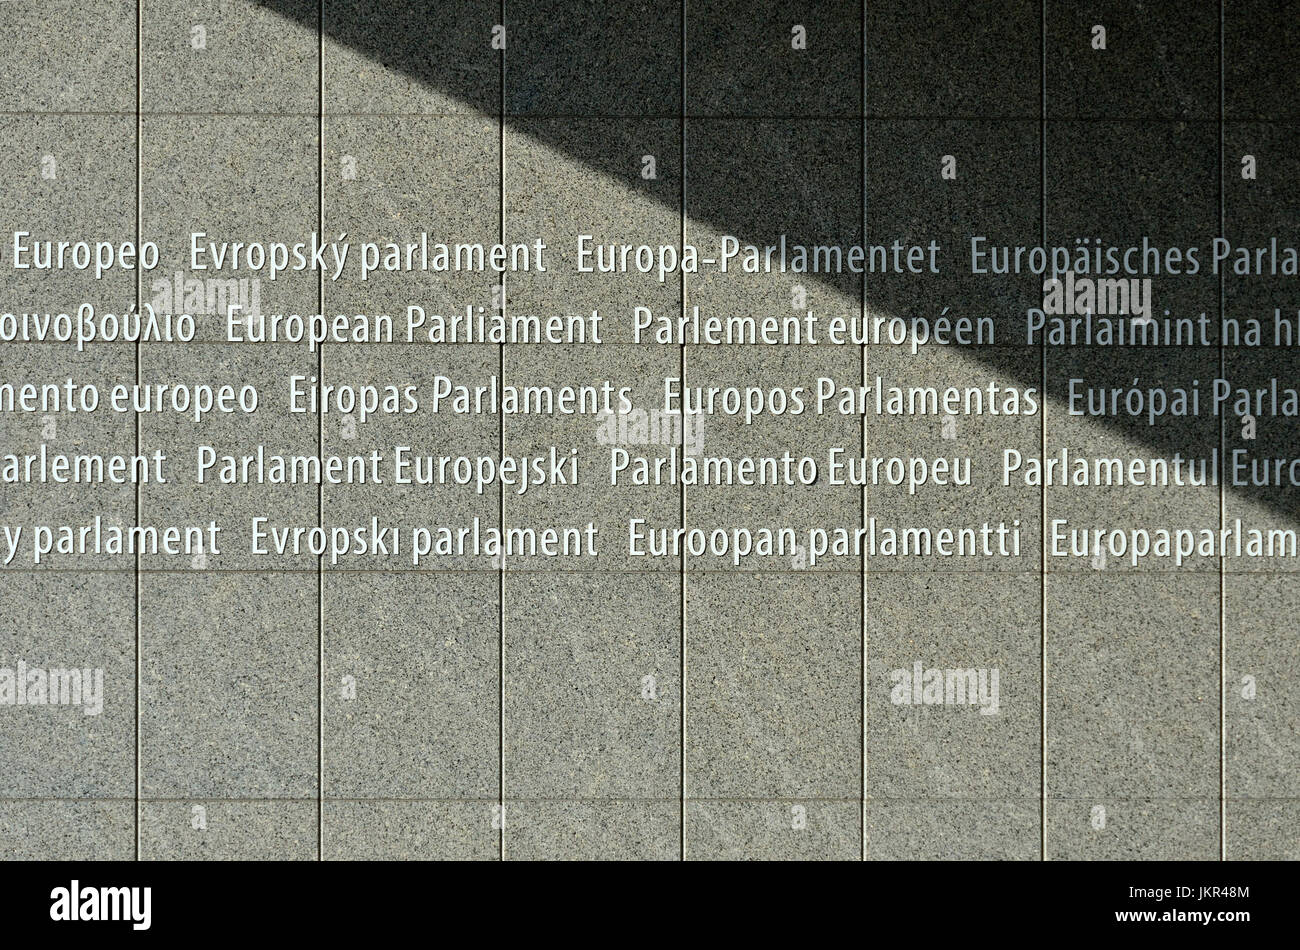 Brussels, Belgium. European Parliament Building. All the languages of the EU at the main entrance Stock Photo